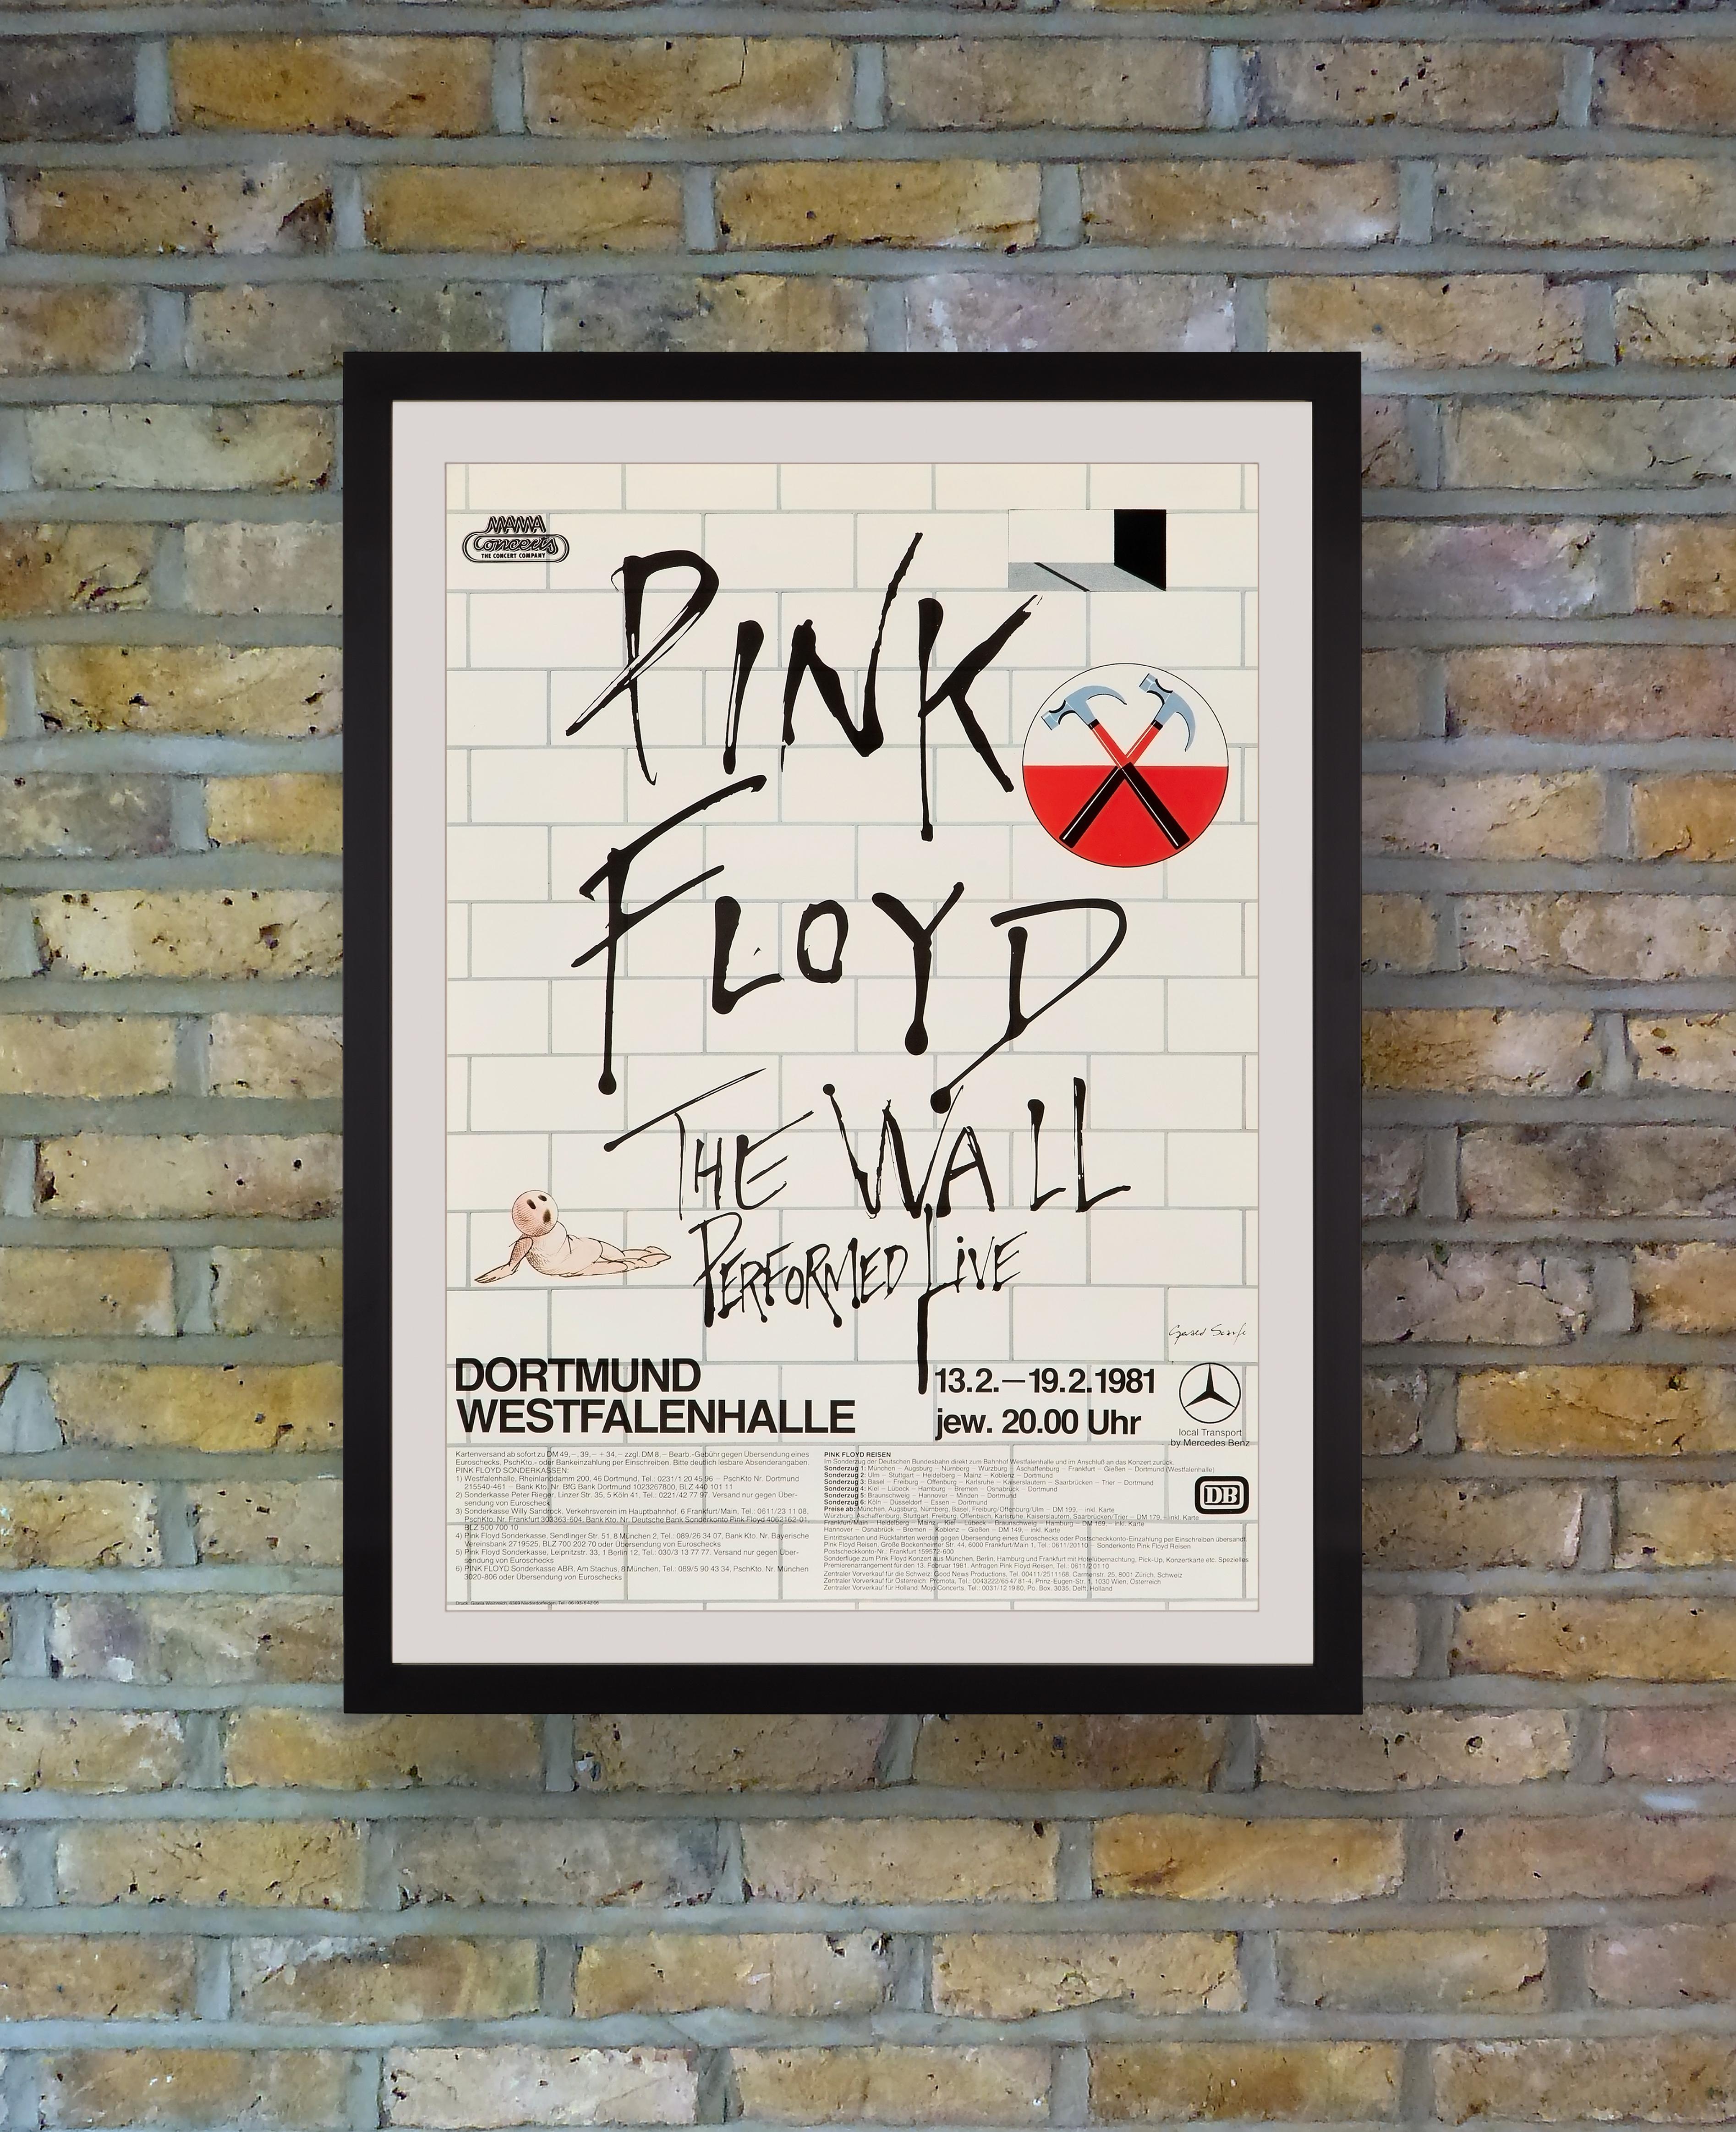 A tour poster for a series of performances of The Wall by Pink Floyd at the Westfalenhalle, Dortmund, Germany, from 13th-19th February 1981. Based on a narrative concept by Roger Waters, Pink Floyd's seminal 1979 album 'The Wall' had sprung from